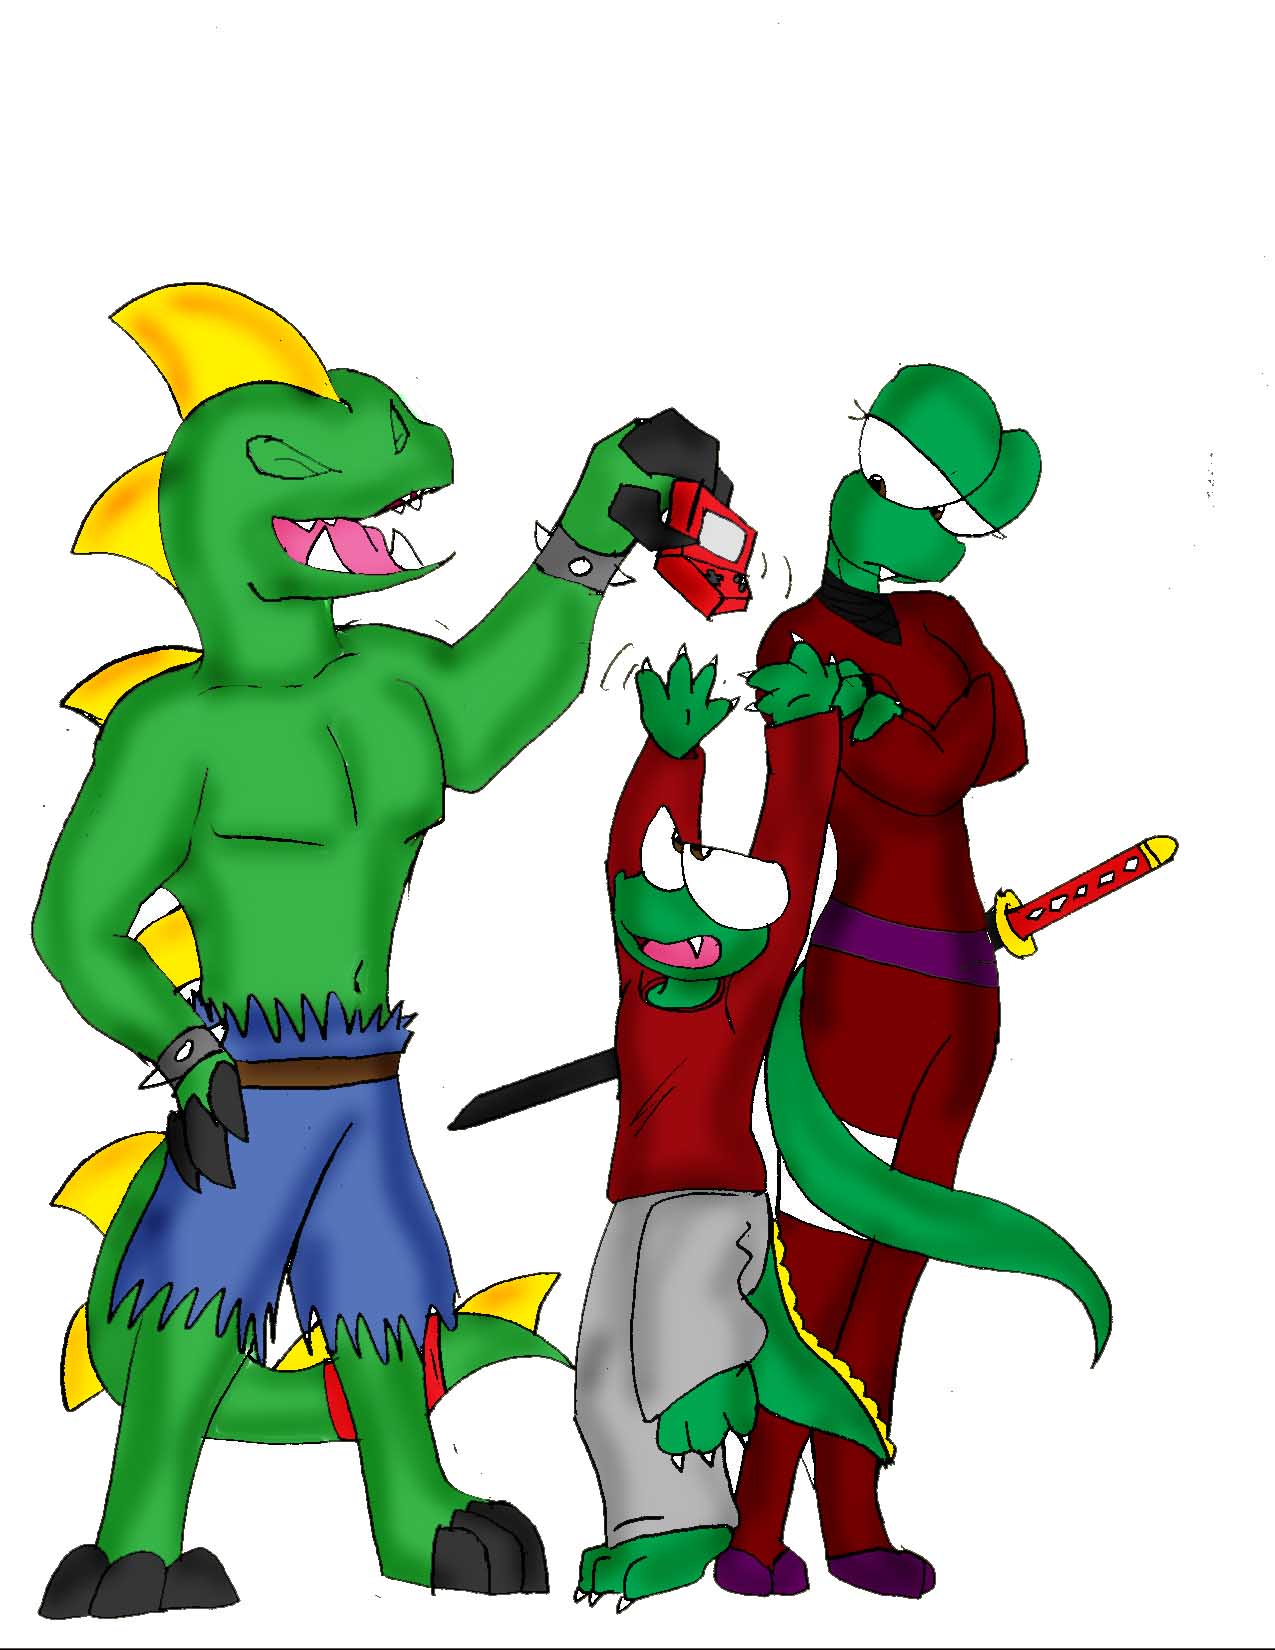 "The Three Stooges" by crocdragon89